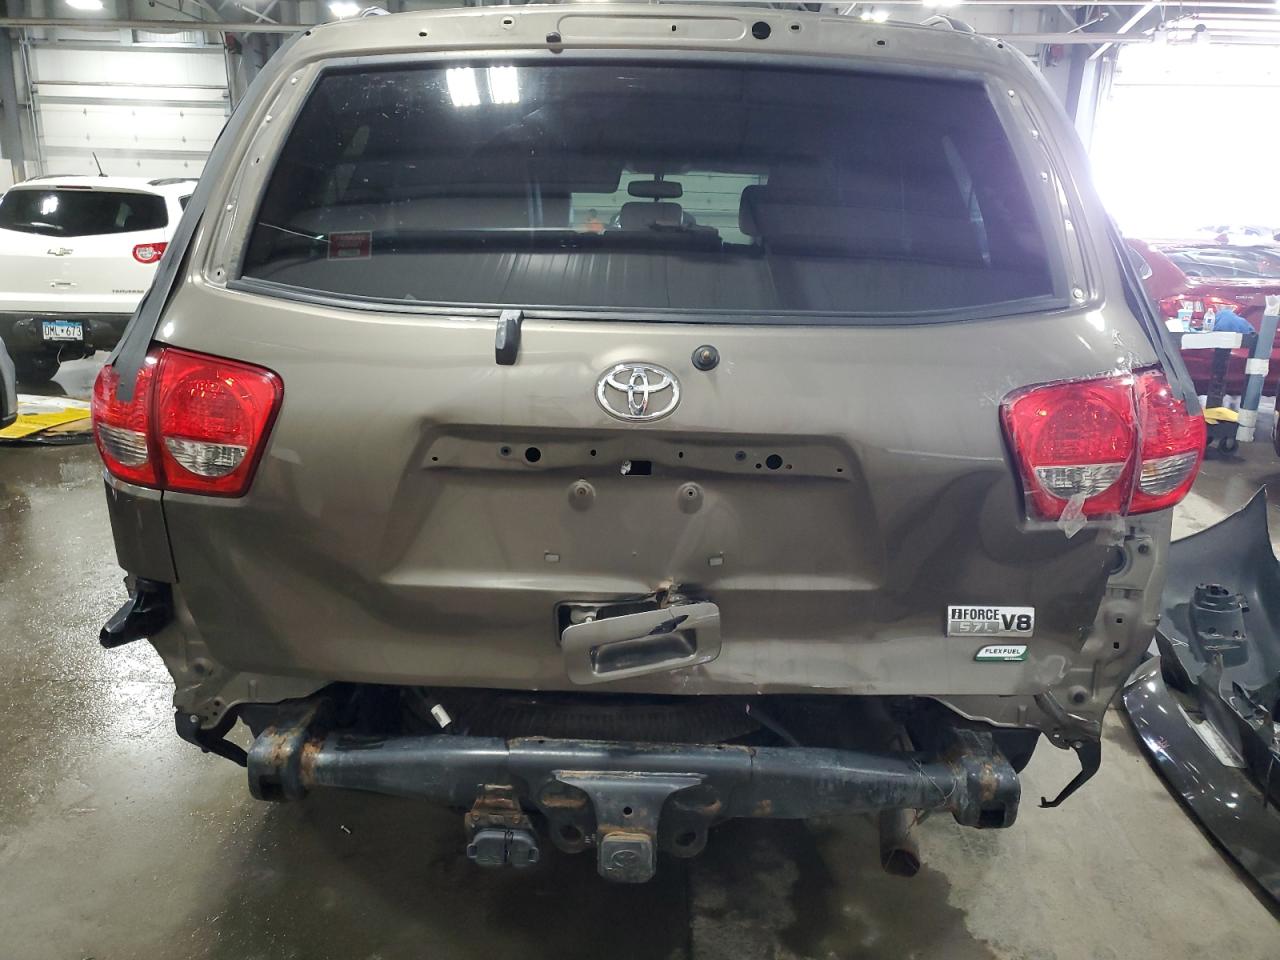 5TDJW5G10DS079106  - TOYOTA SEQUOIA  2013 IMG - 5